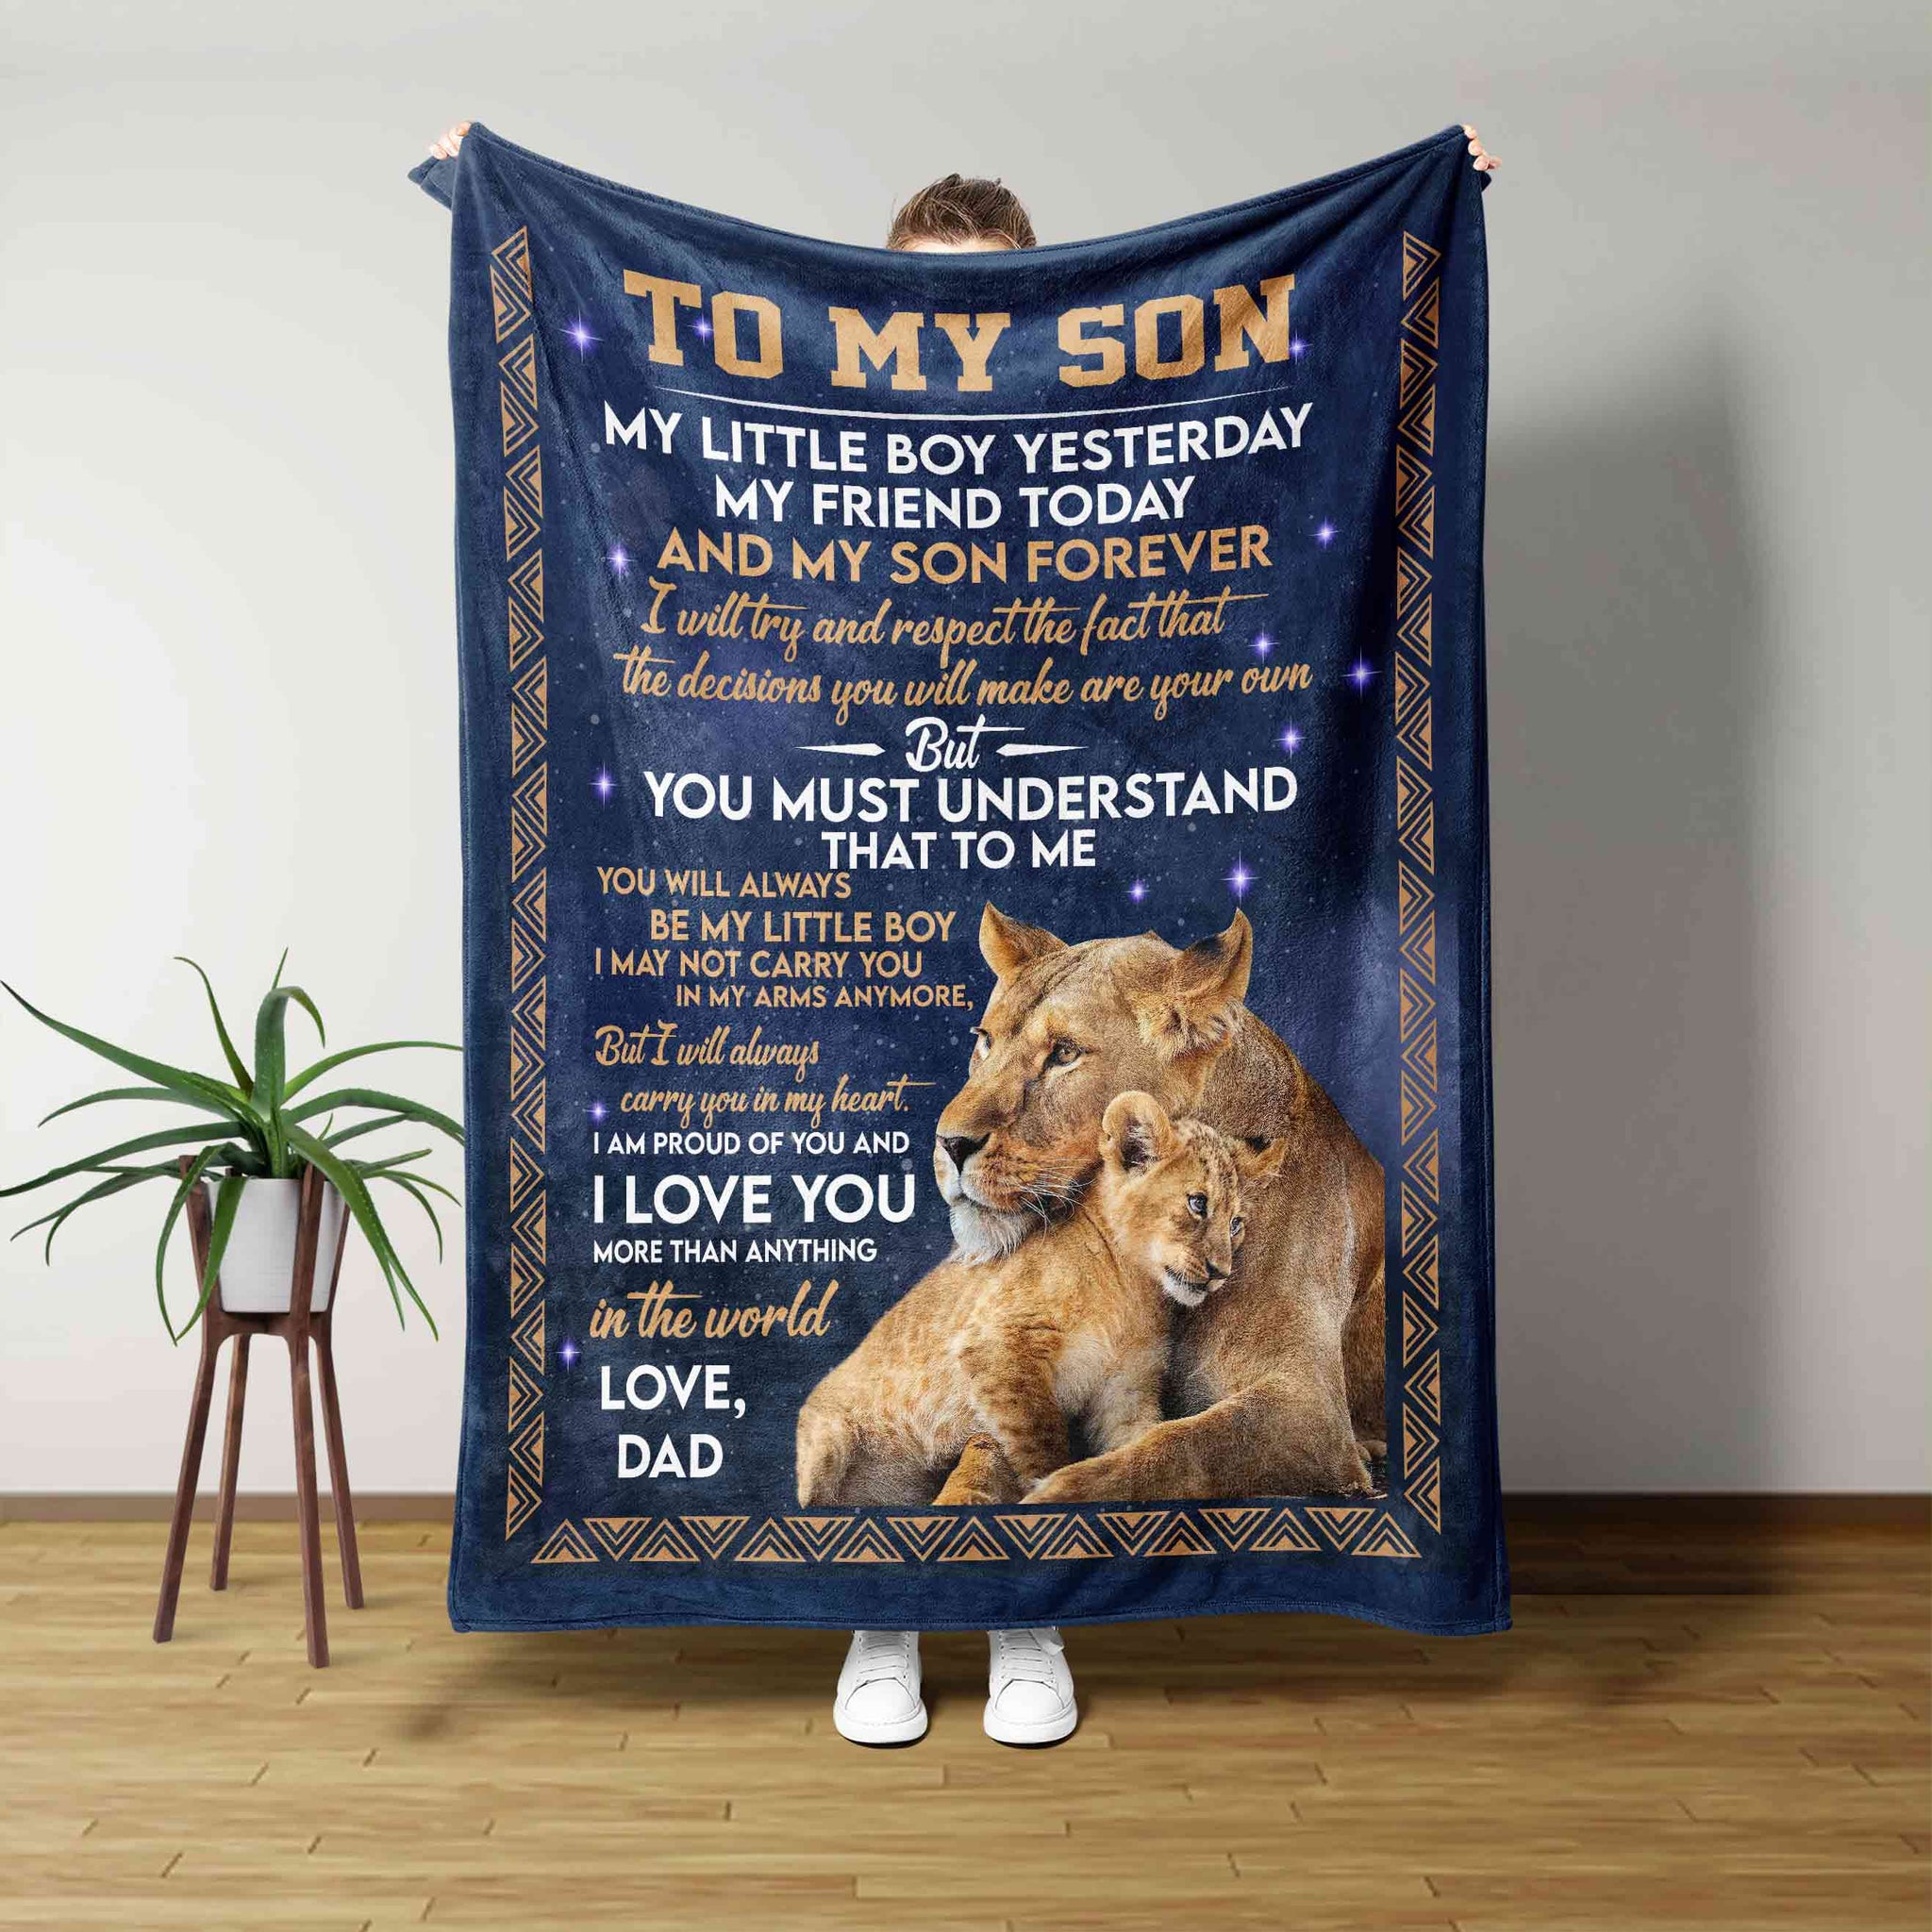 Personalized Name Blanket, To My Son Blanket, Lion Blanket, Family Blanket, Gift Blanket